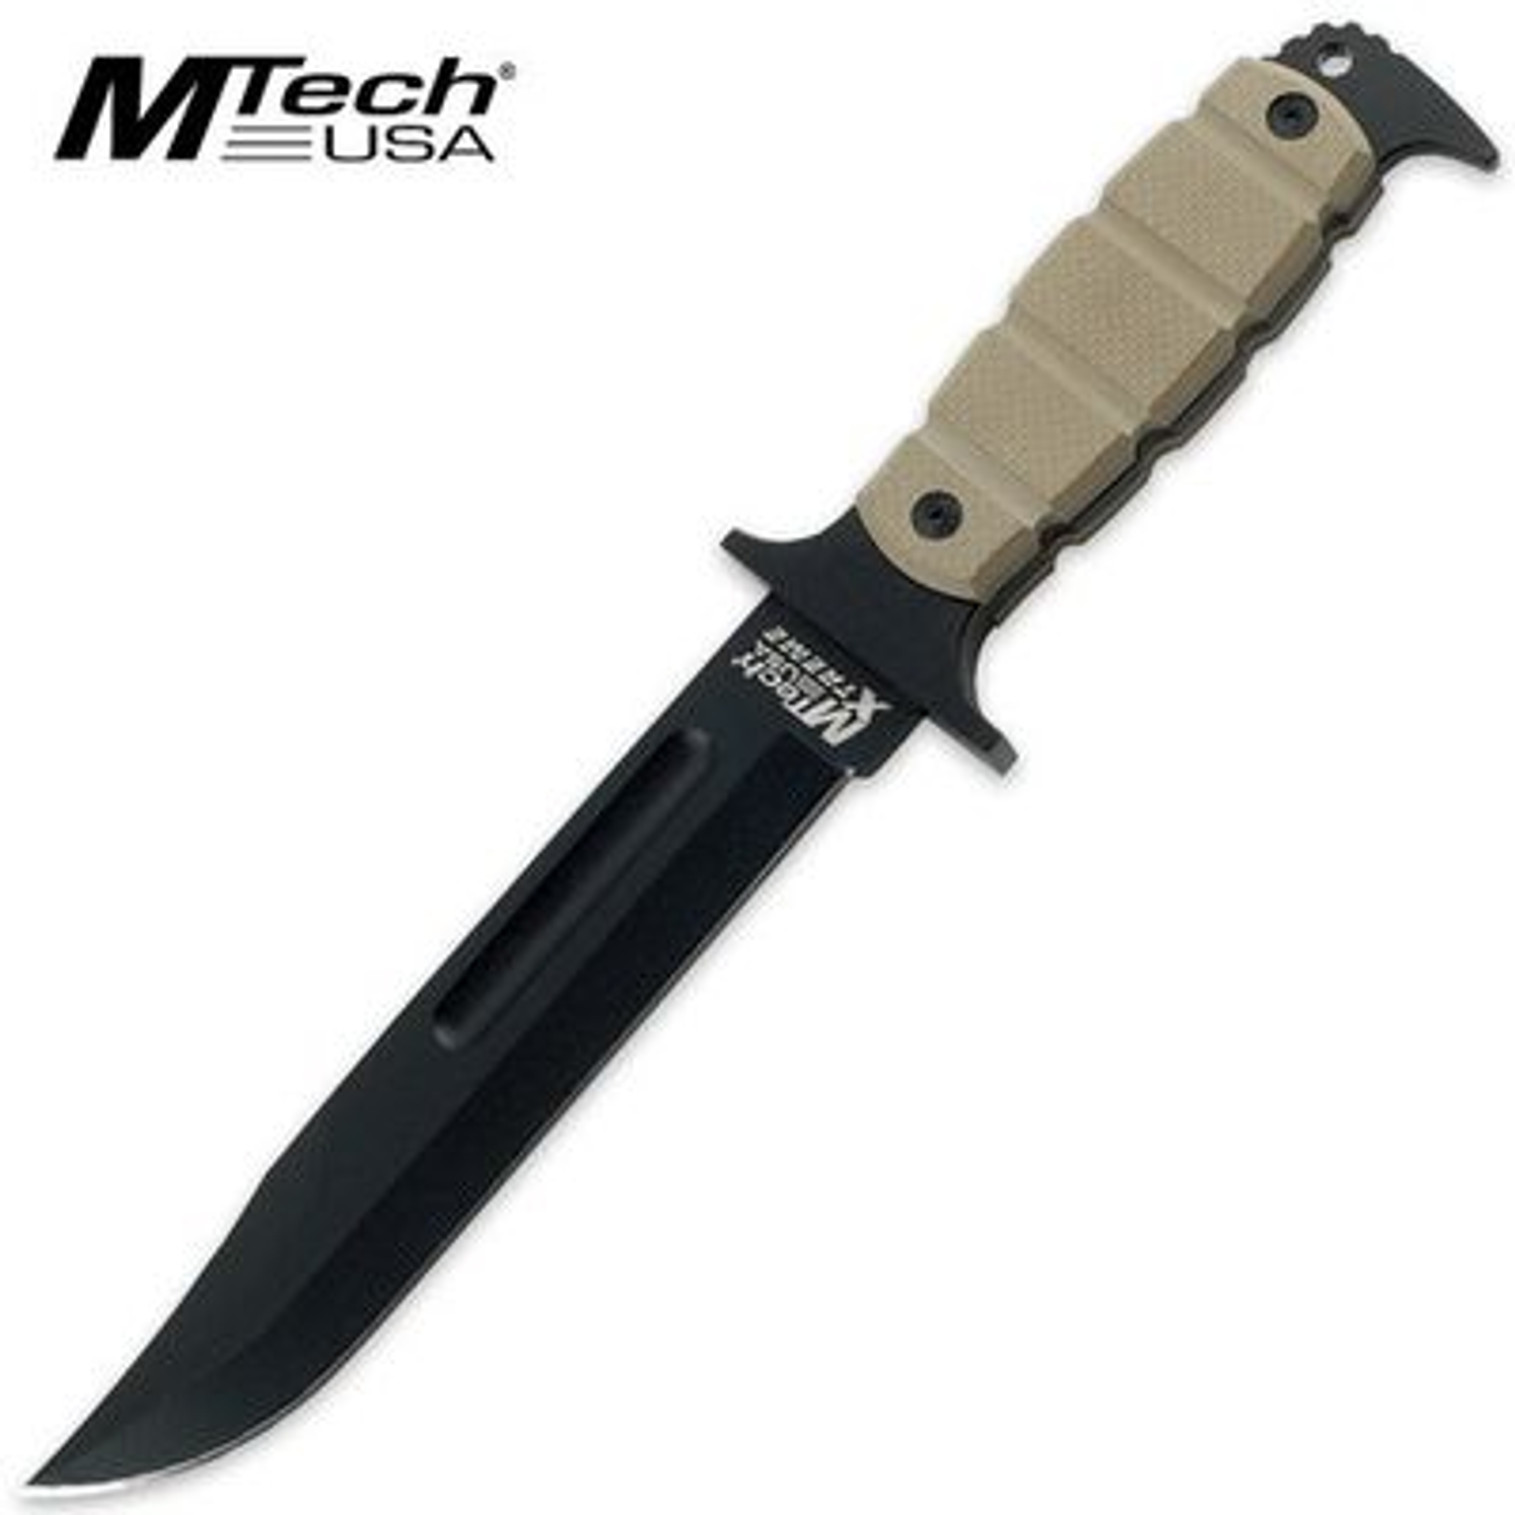 MTech Xtreme 1-Inch Fixed Blade Tactical Knife - Tan